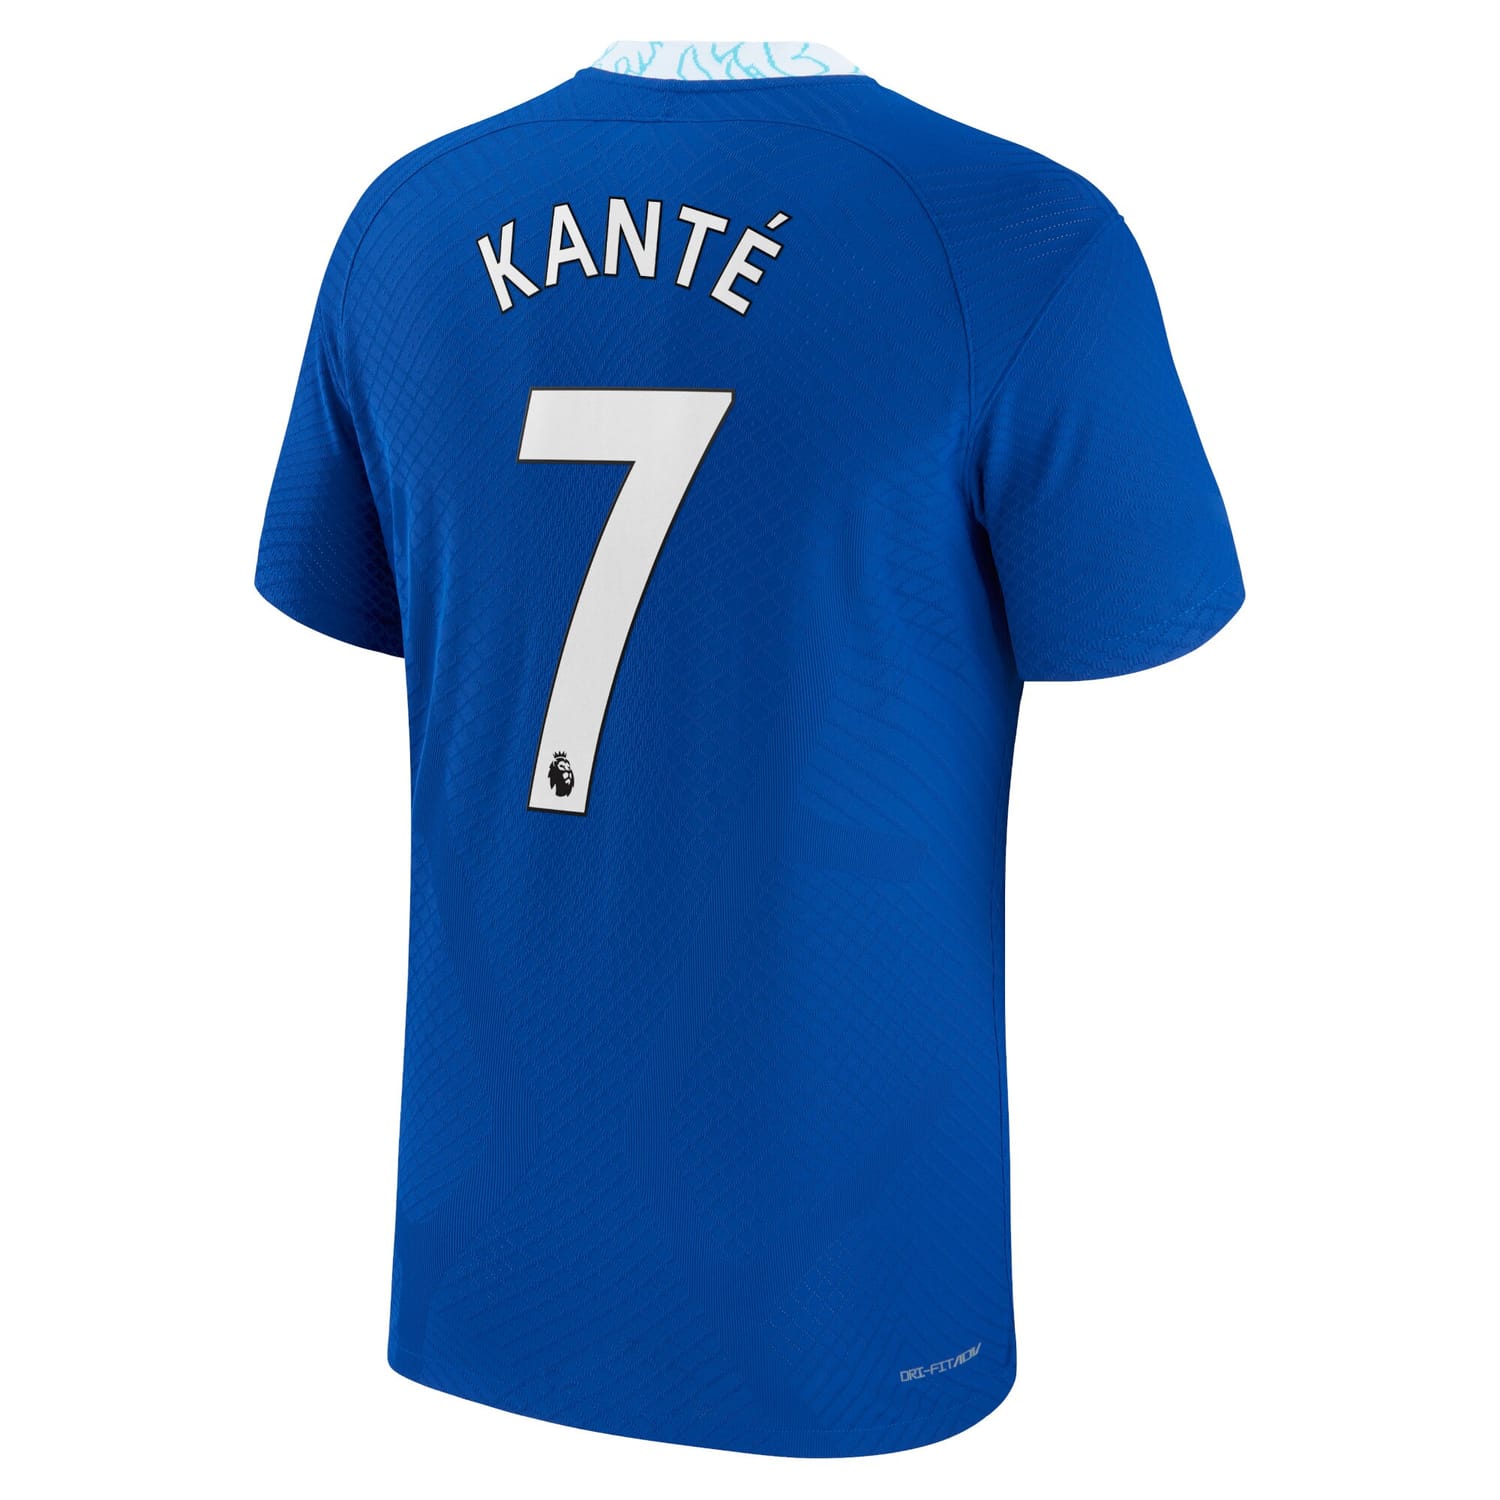 Premier League Chelsea Home Authentic Jersey Shirt 2022-23 player N'Golo Kante 7 printing for Men